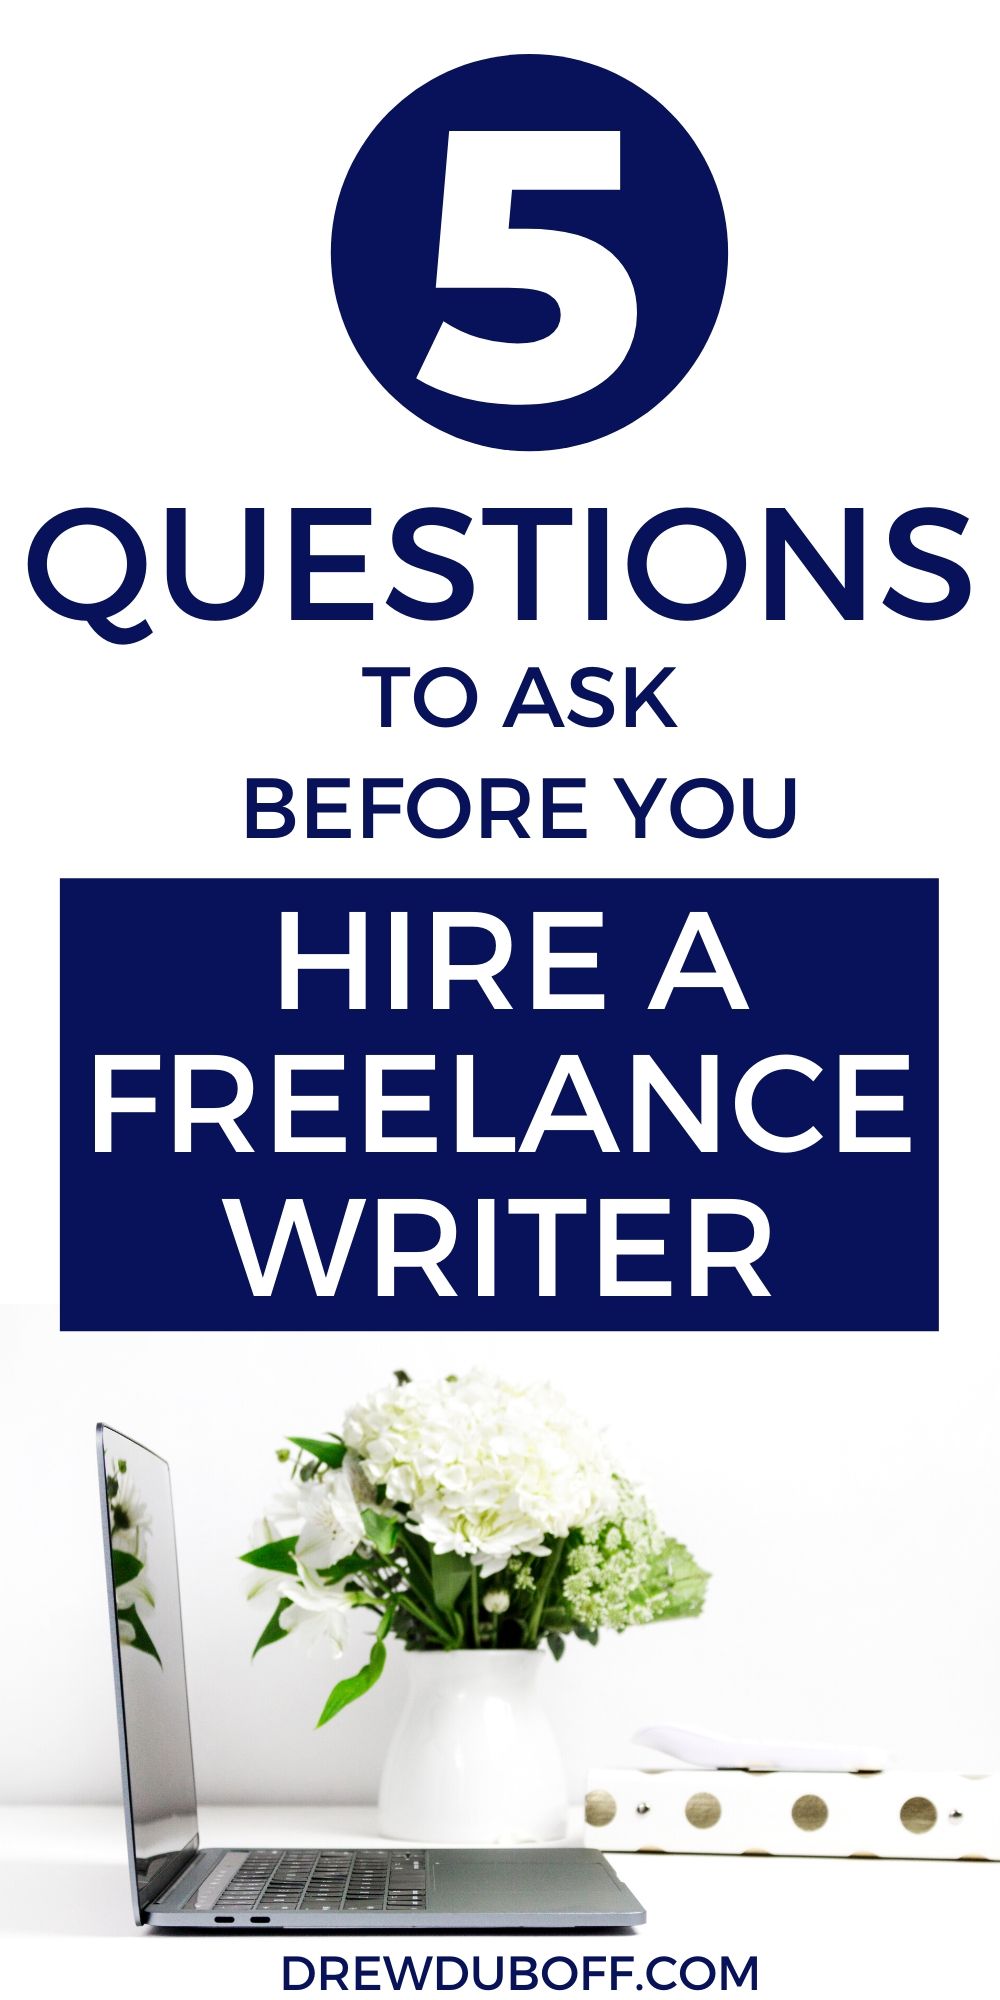 5 Questions to Ask Before You Hire a Freelance Writer